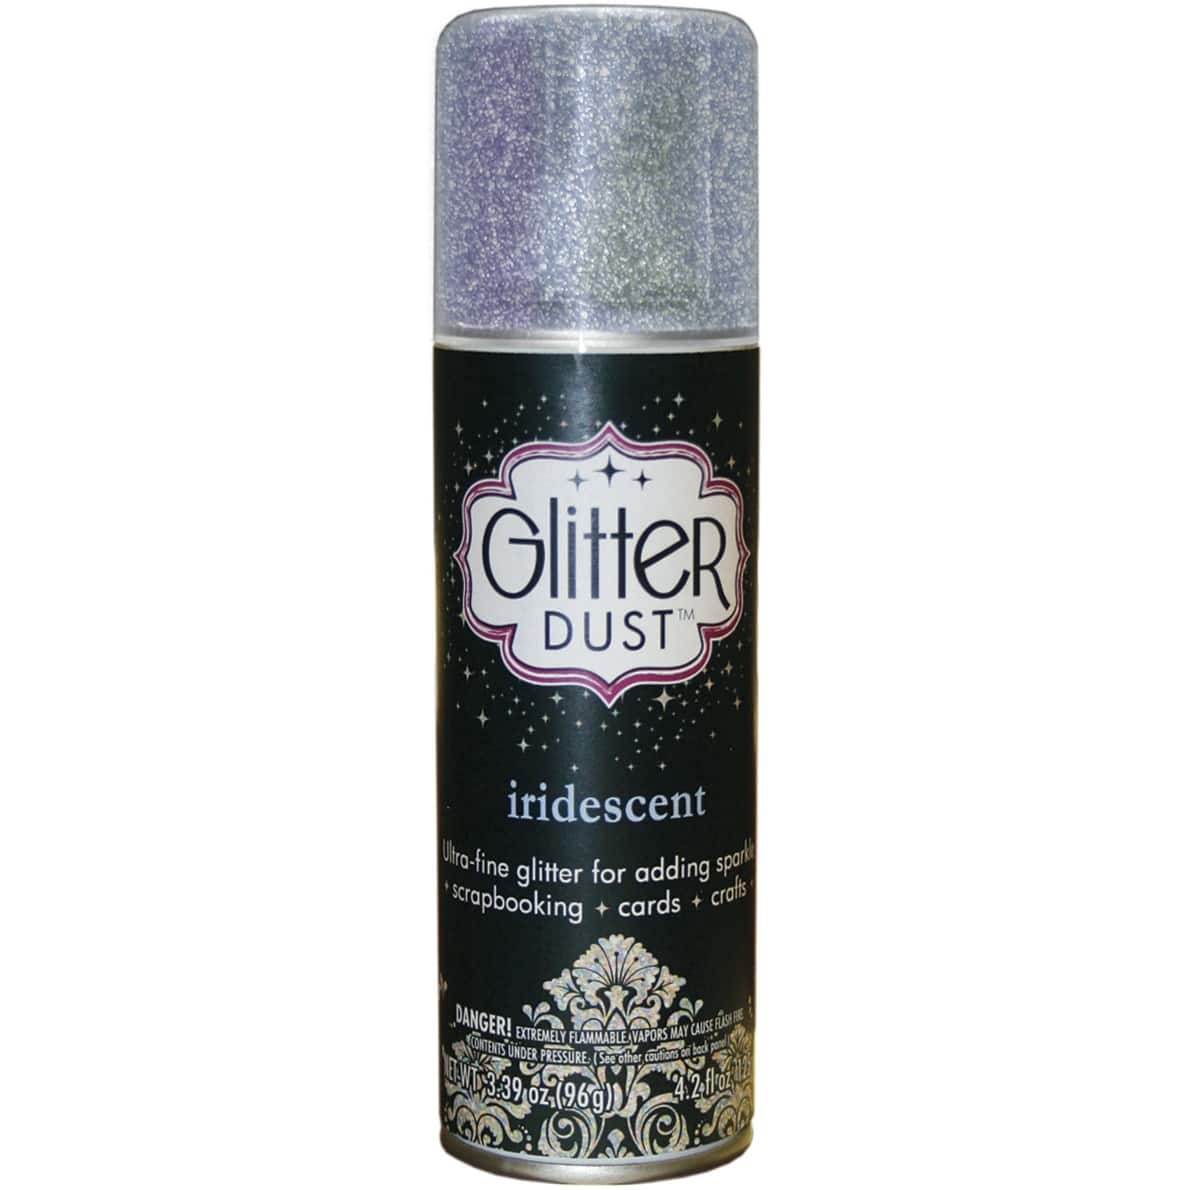 This is the glitter of all glitters! #painting #spraypaint #iridescent, spraypaint